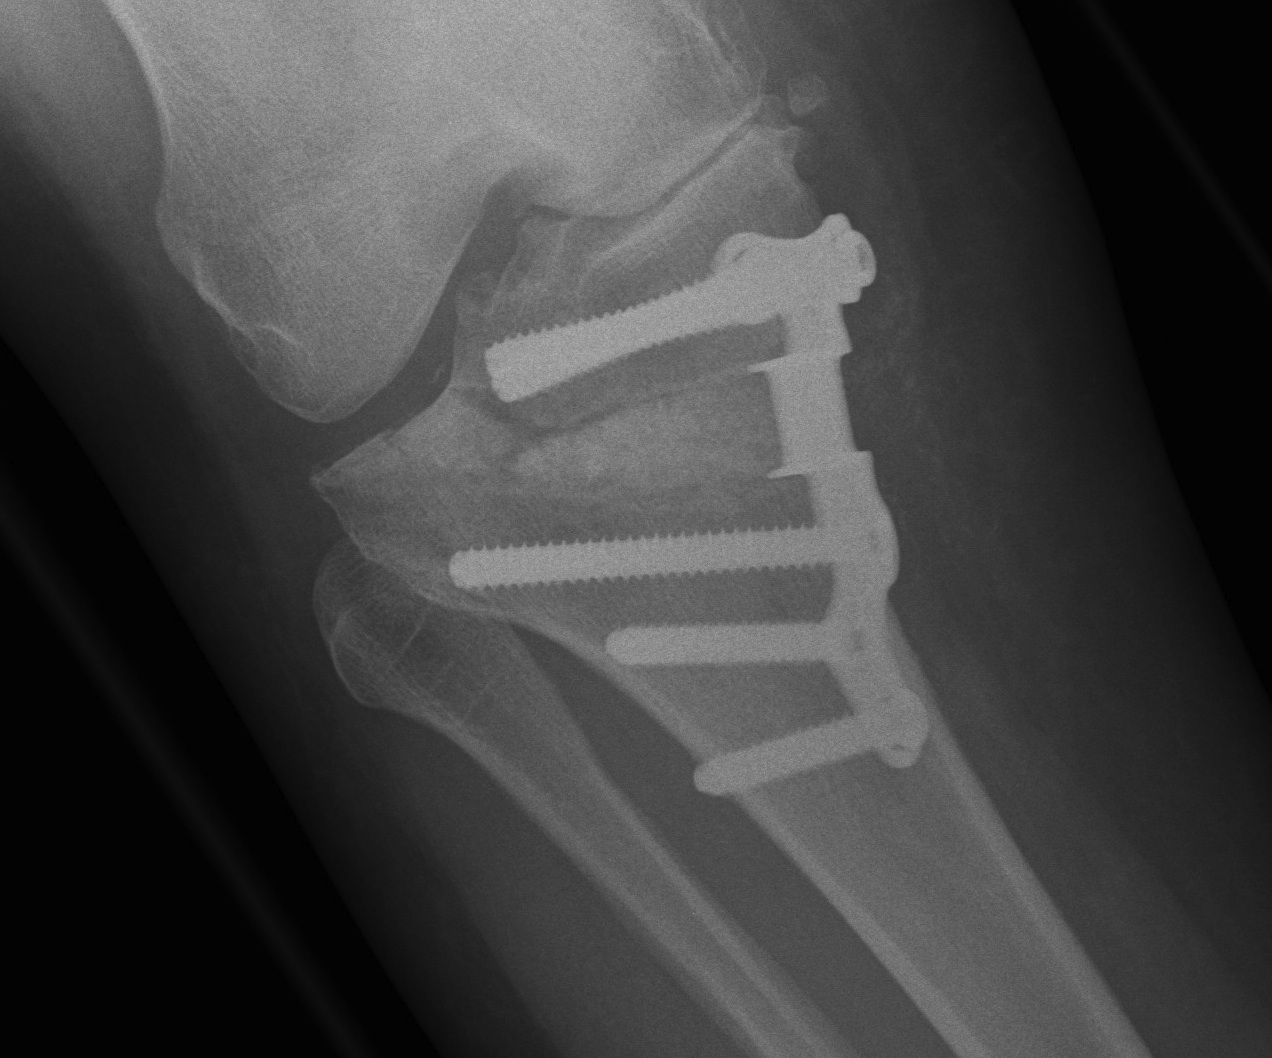 HTO Closing Wedge Intra-articular fracture